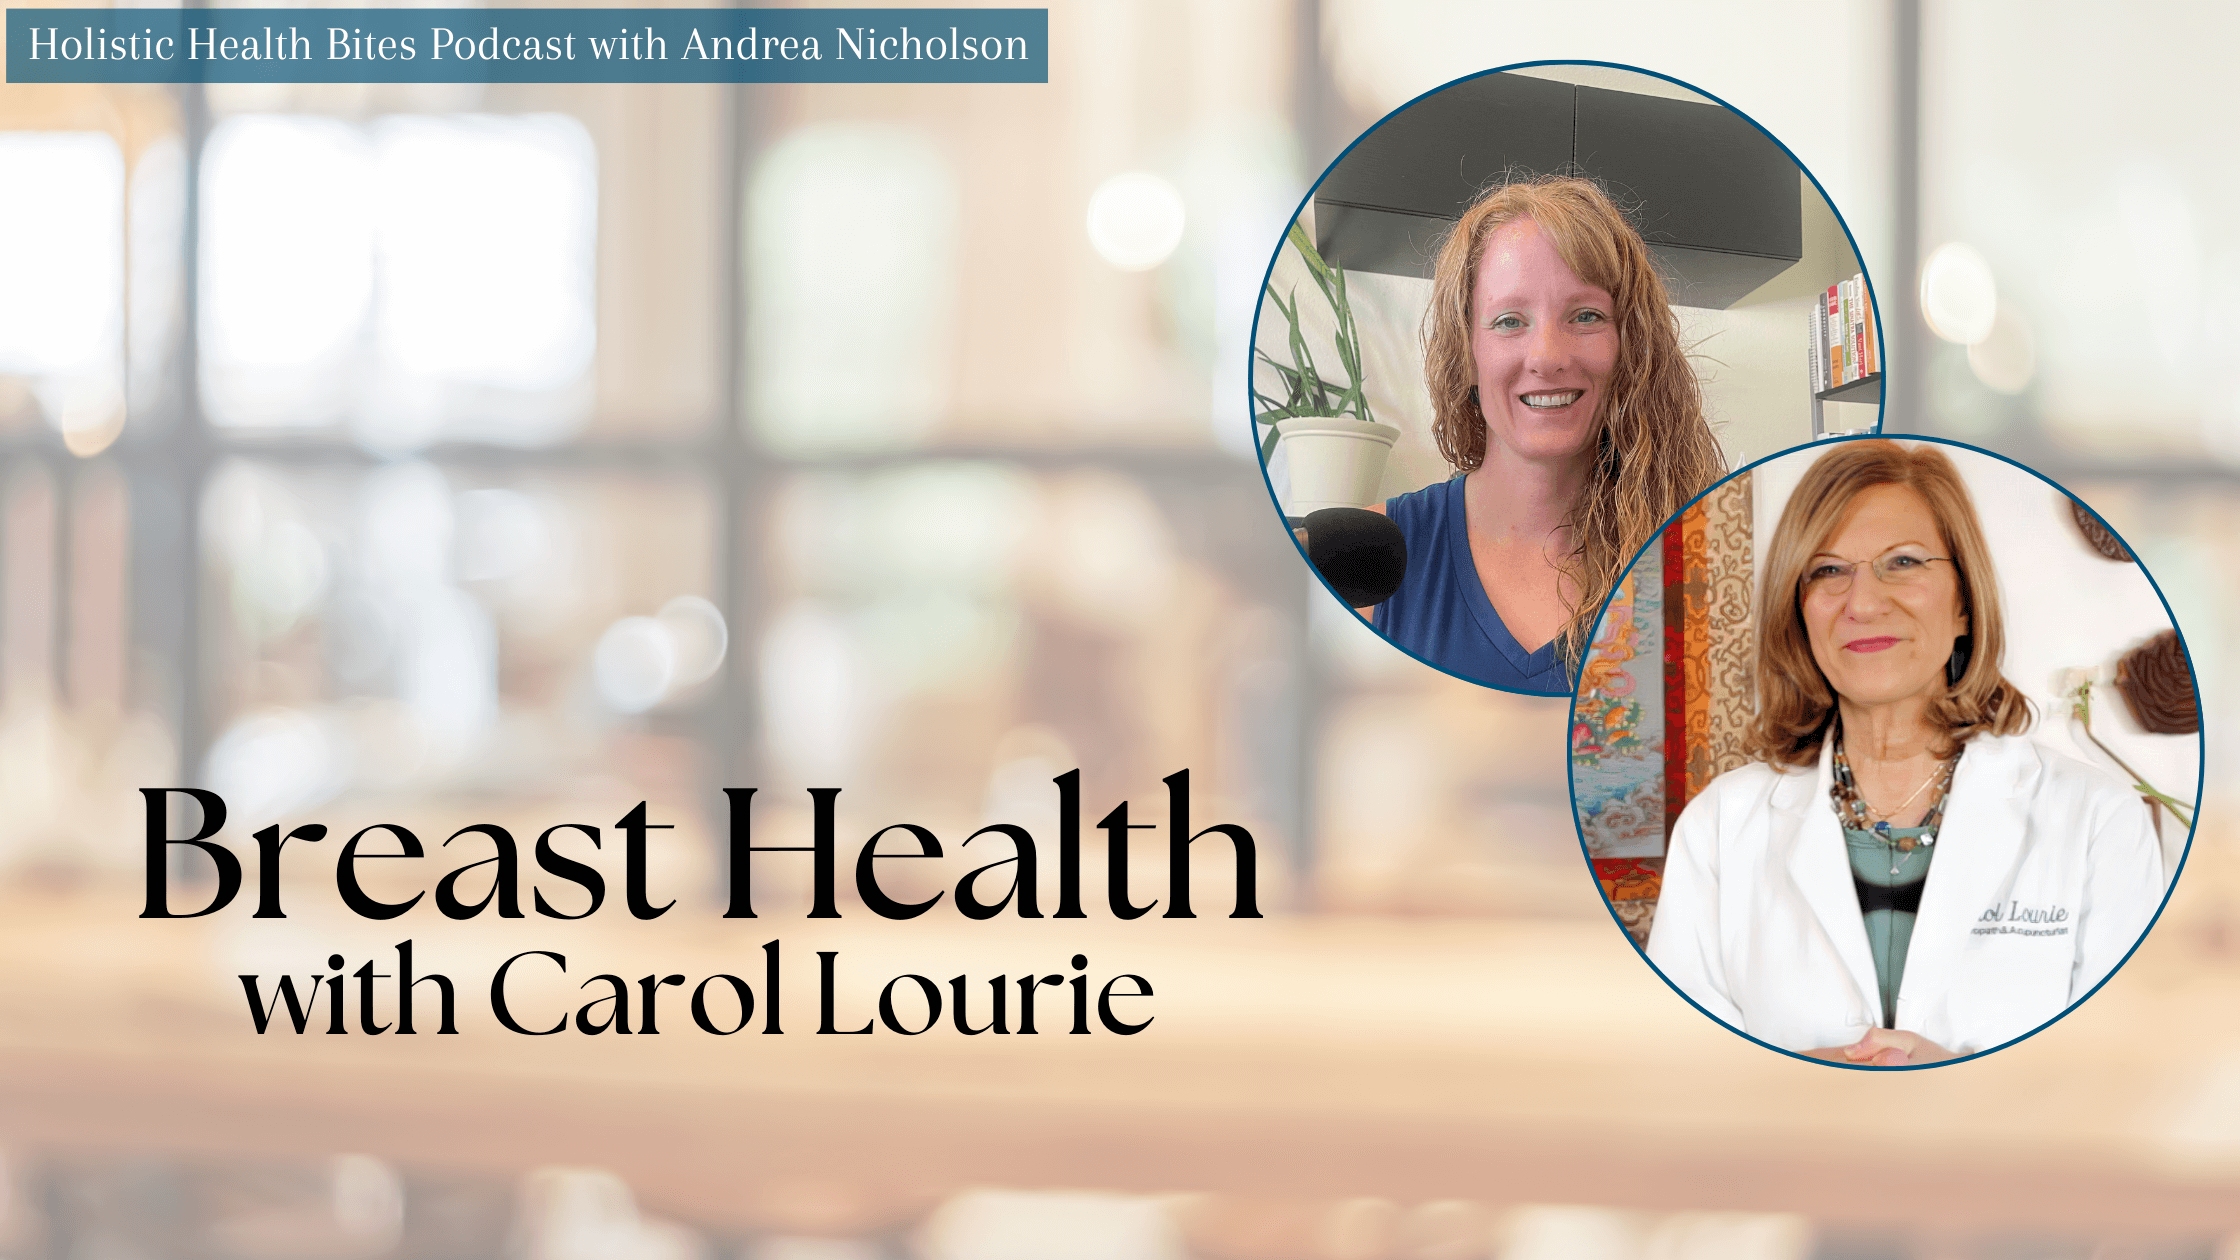 Breast Health with Carol Lourie on the Holistic Health Bites podcast with Functional Nutritionist Andrea Nicholson